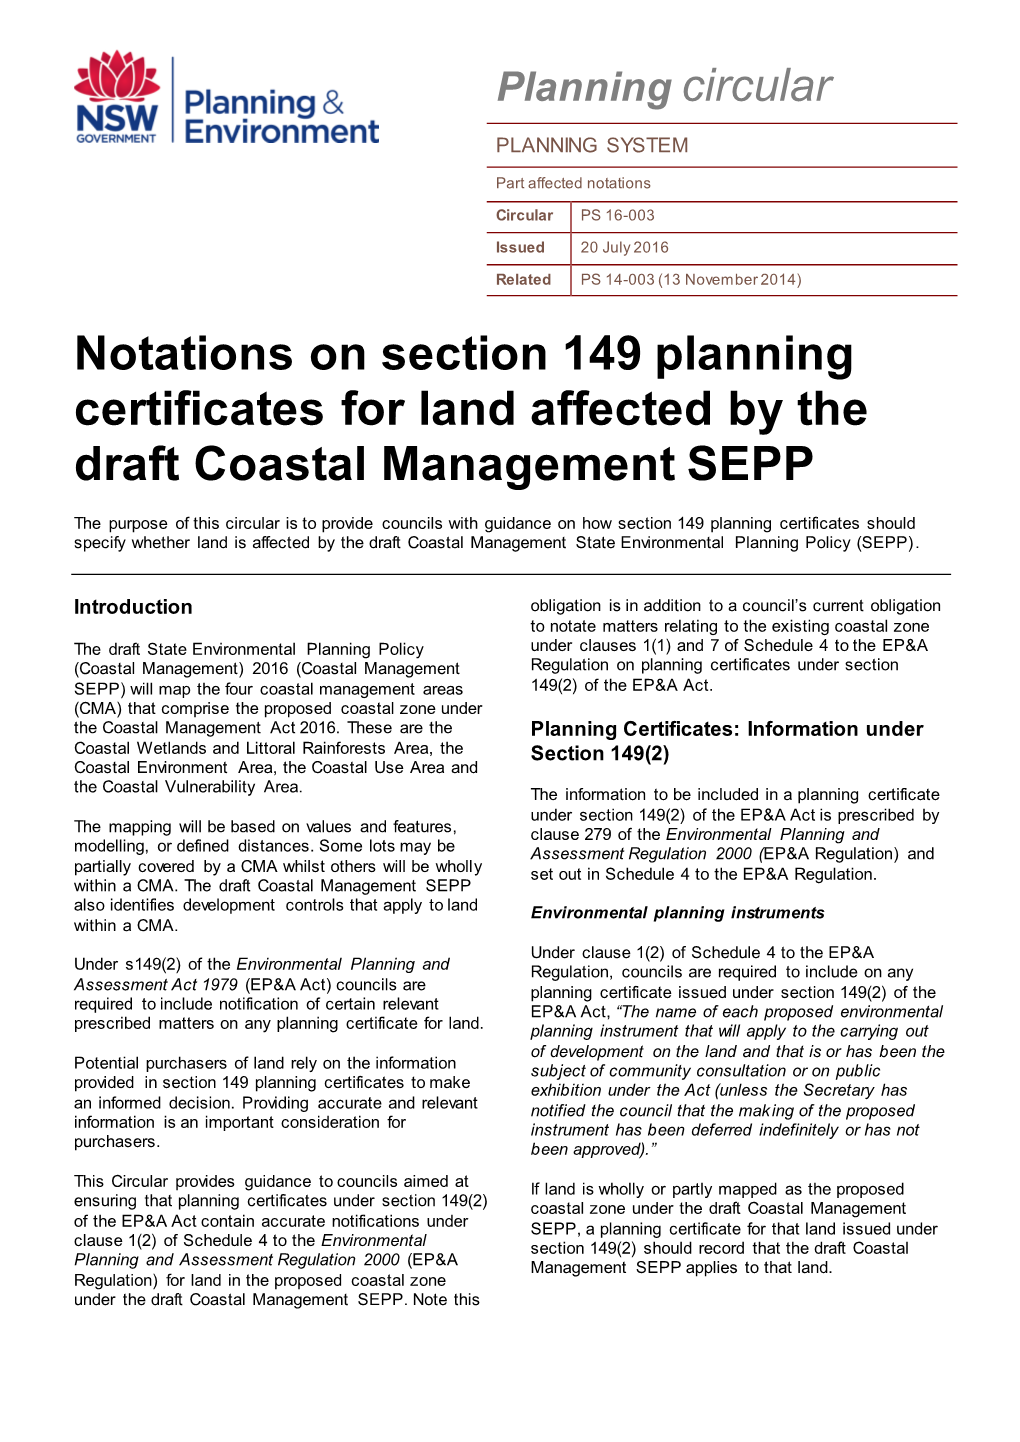 Notations on Section 149 Planning Certificates for Land Affected by the Draft Coastal Management SEPP